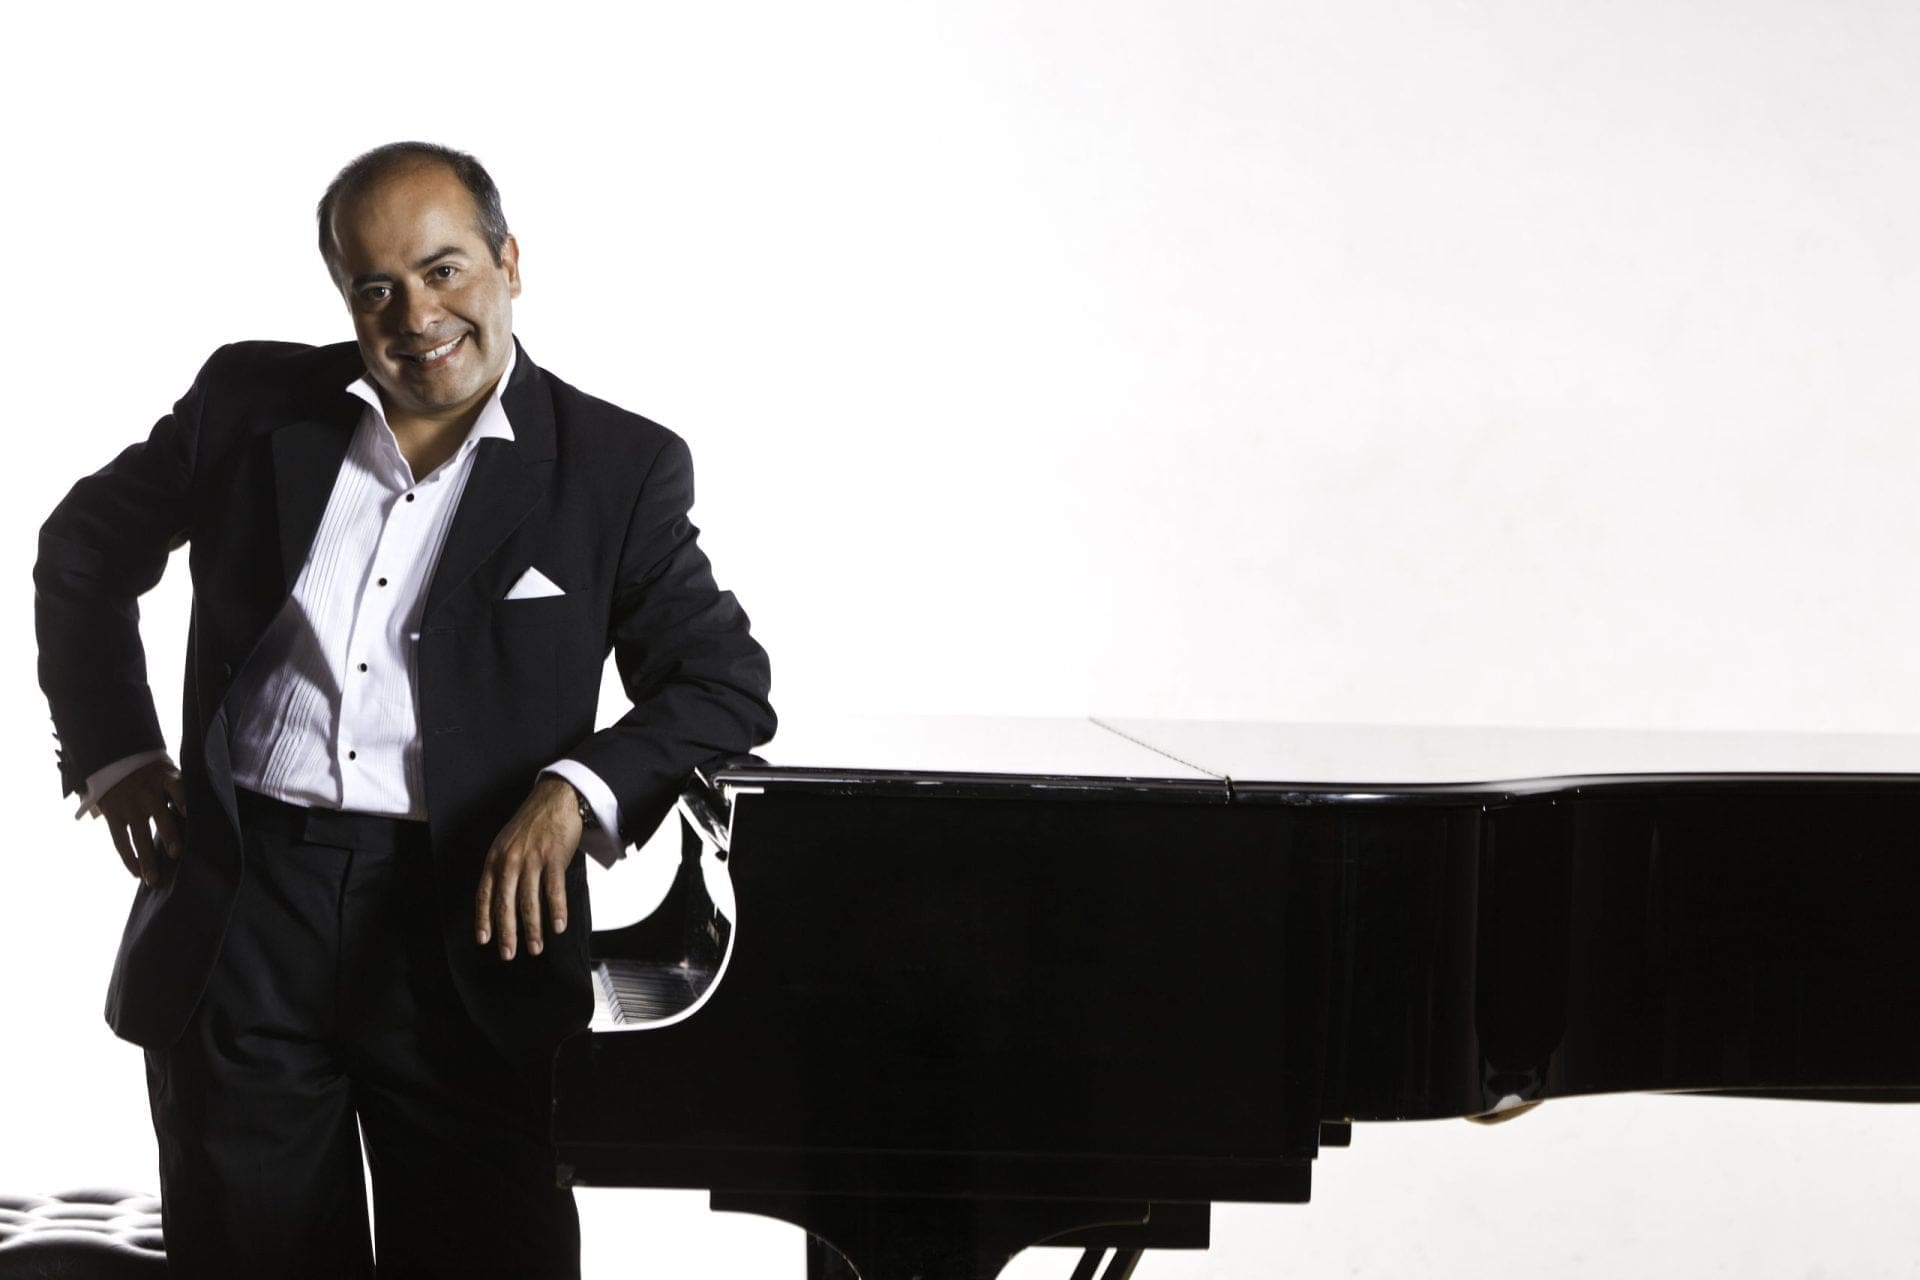 Lawyers with side-hustles: Ivan Guevara, lawyer and professional pianist